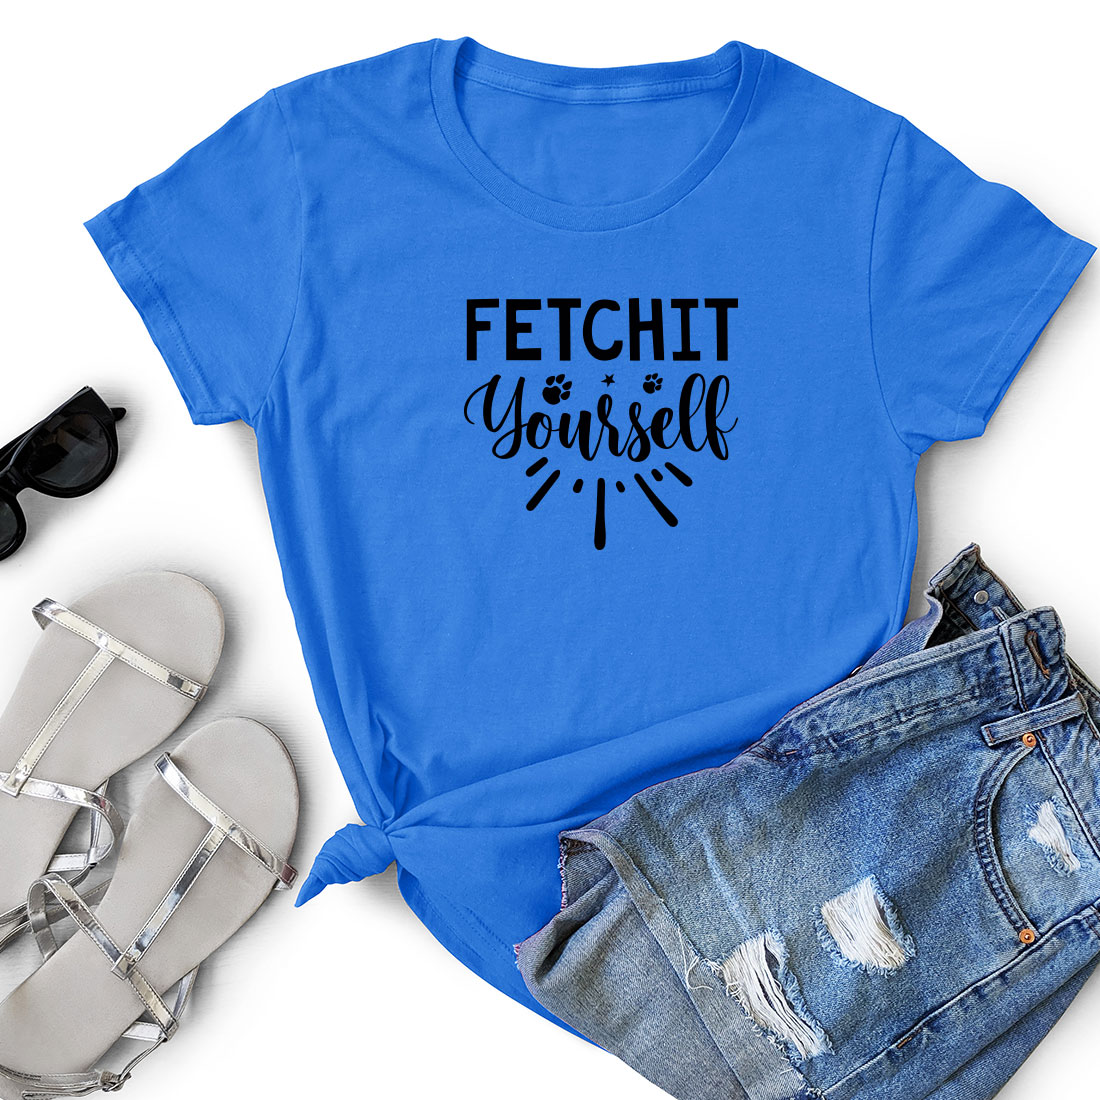 Women's t - shirt that says fetchit yourself.